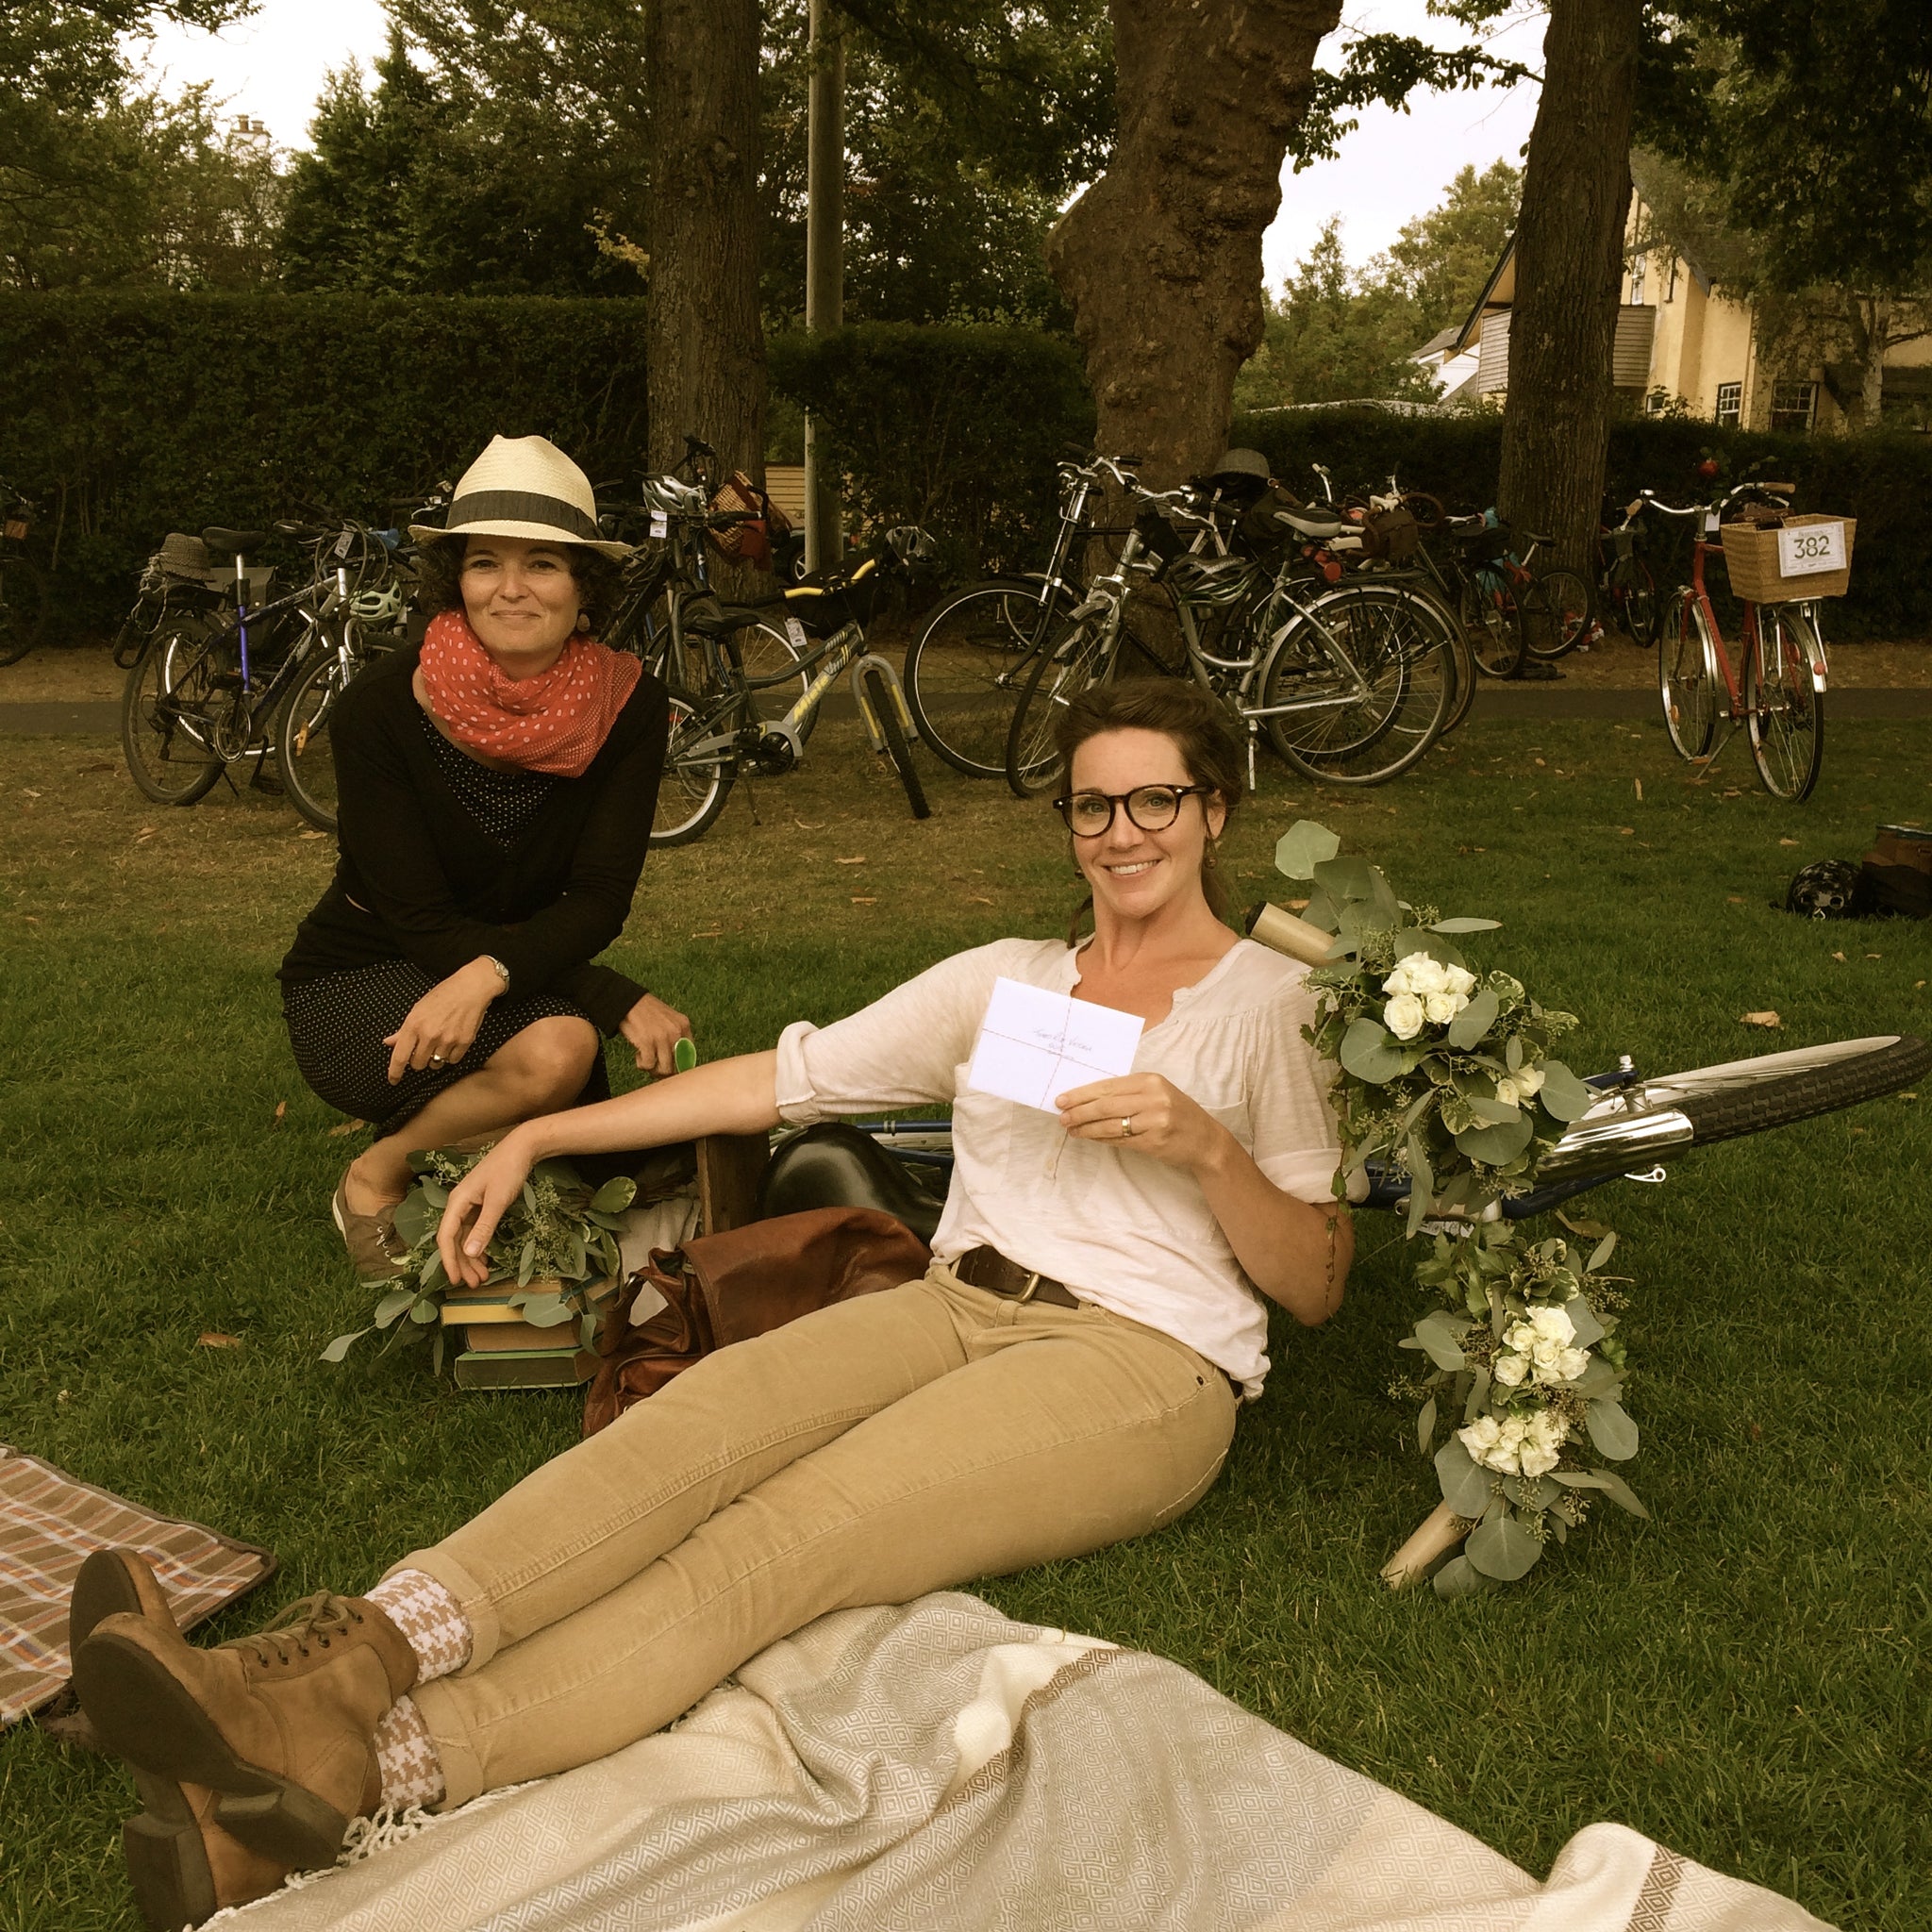 Le Velo Victoria with the Stylish Bicycle Accessroy Contest Winner from 2015 Tweed Ride Victoria